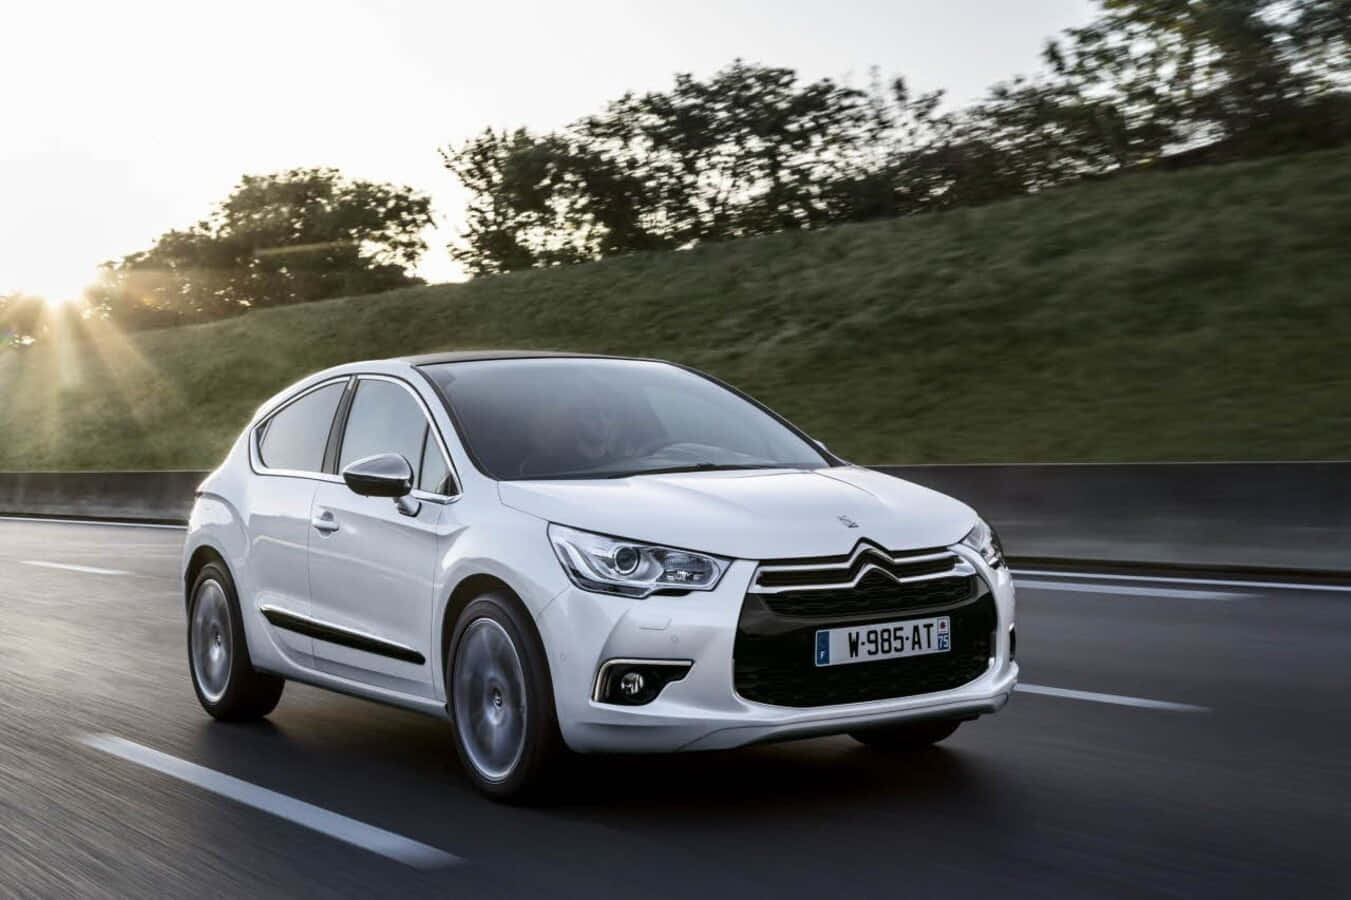 A Stunning View Of The New Ds 4 In An Urban Environment Wallpaper